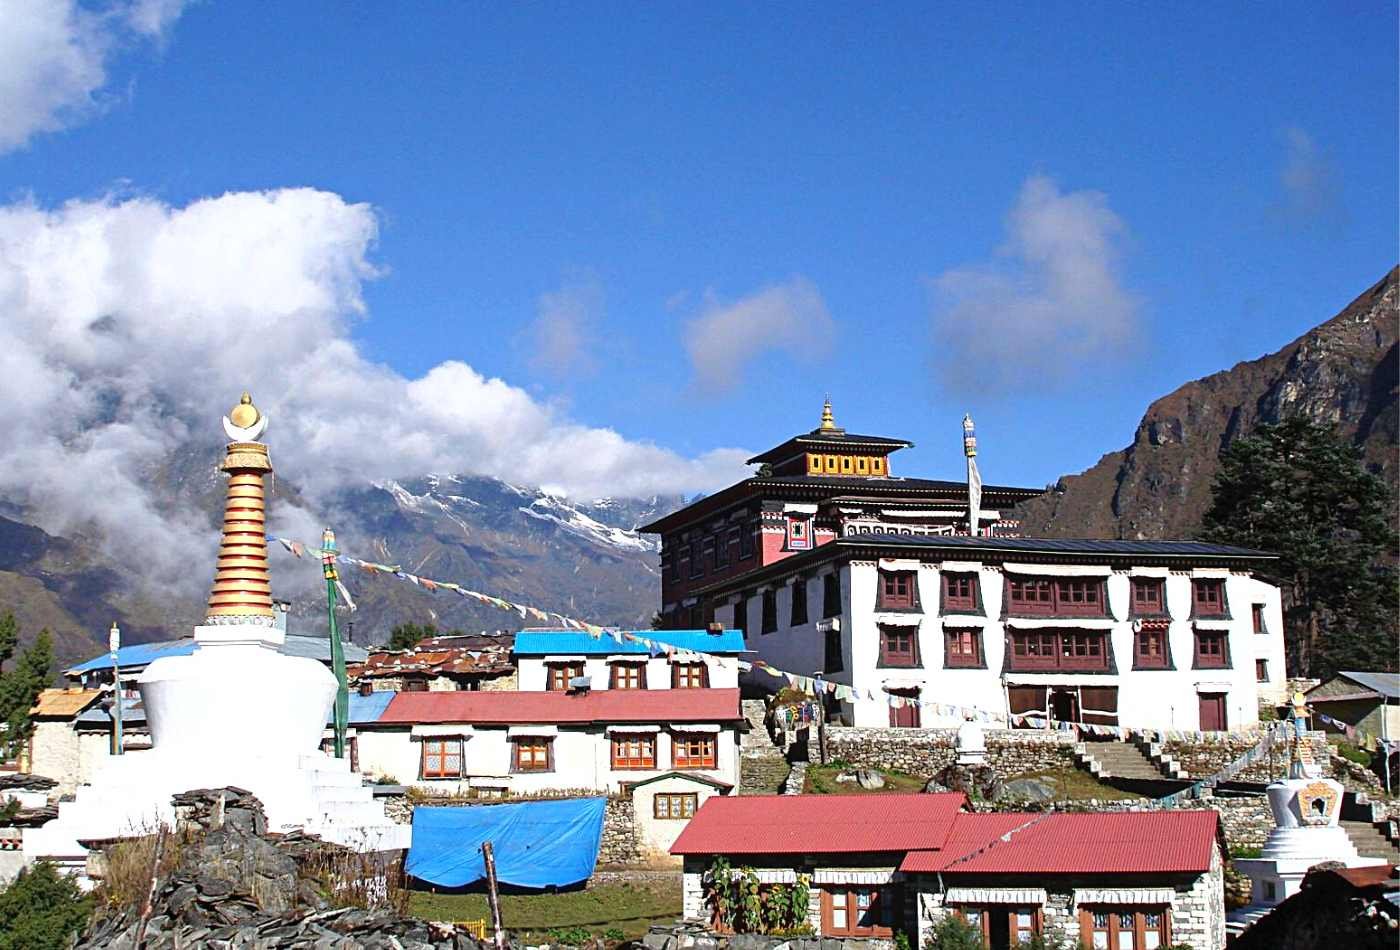 Tengboche Monastery, a traditional Tibetan Buddhist monastery located on the trek to Mount Everest Base Camp with red roof and white stupa. 